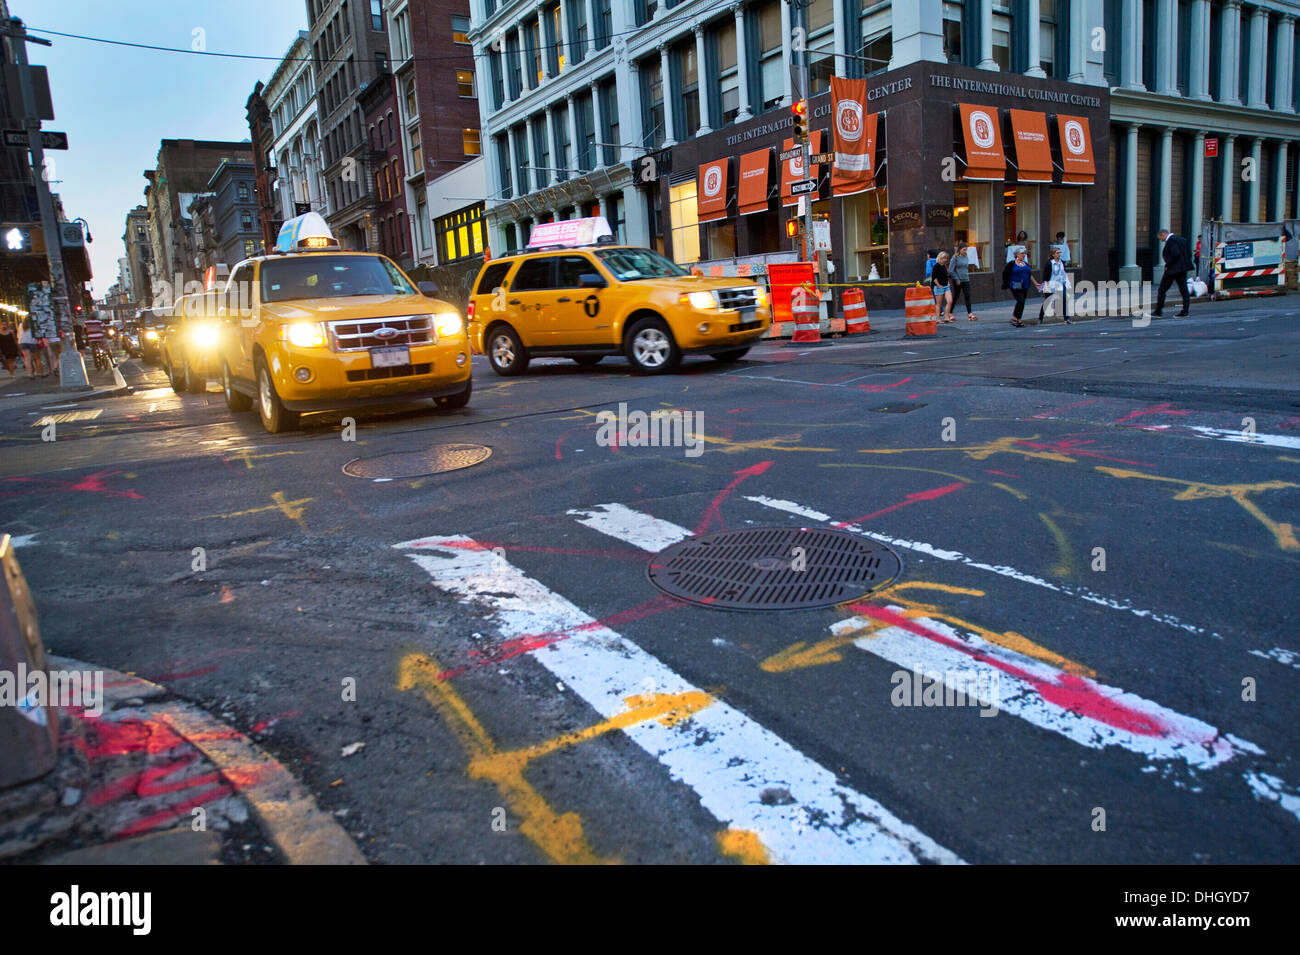 New York yellow taxis passing an intersection in Soho area Stock Photo